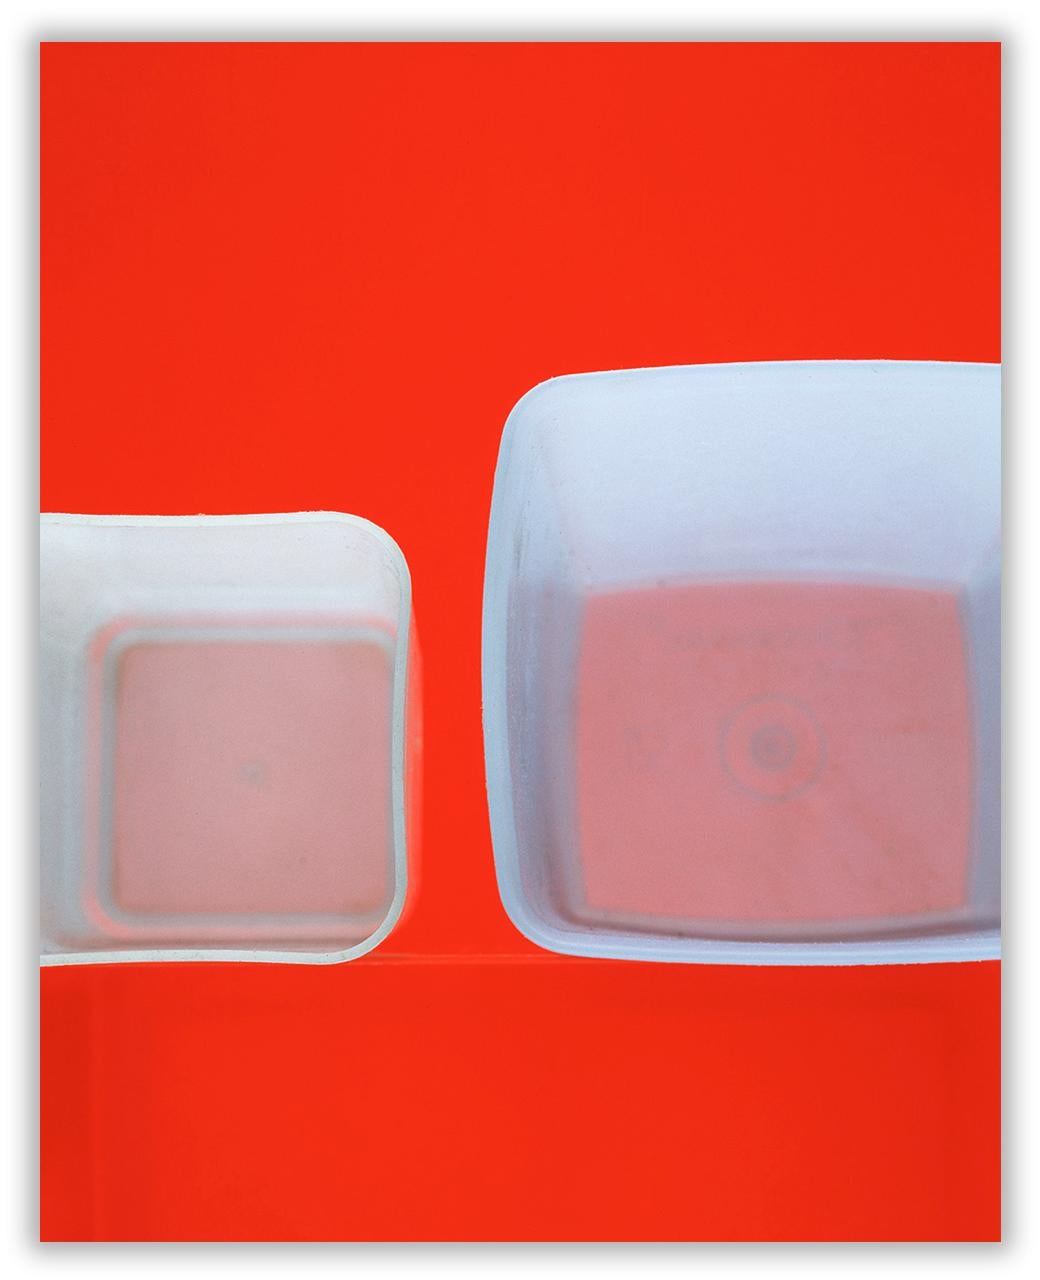 Untitled #58 (Abstract Photography)
C print - Unframed.

"Edition of 5 + 2AP, next 1/5
Richard Caldicott is most well known for this earlier work series which used Tupperware containers as the subject for his photographs.
As he describes :